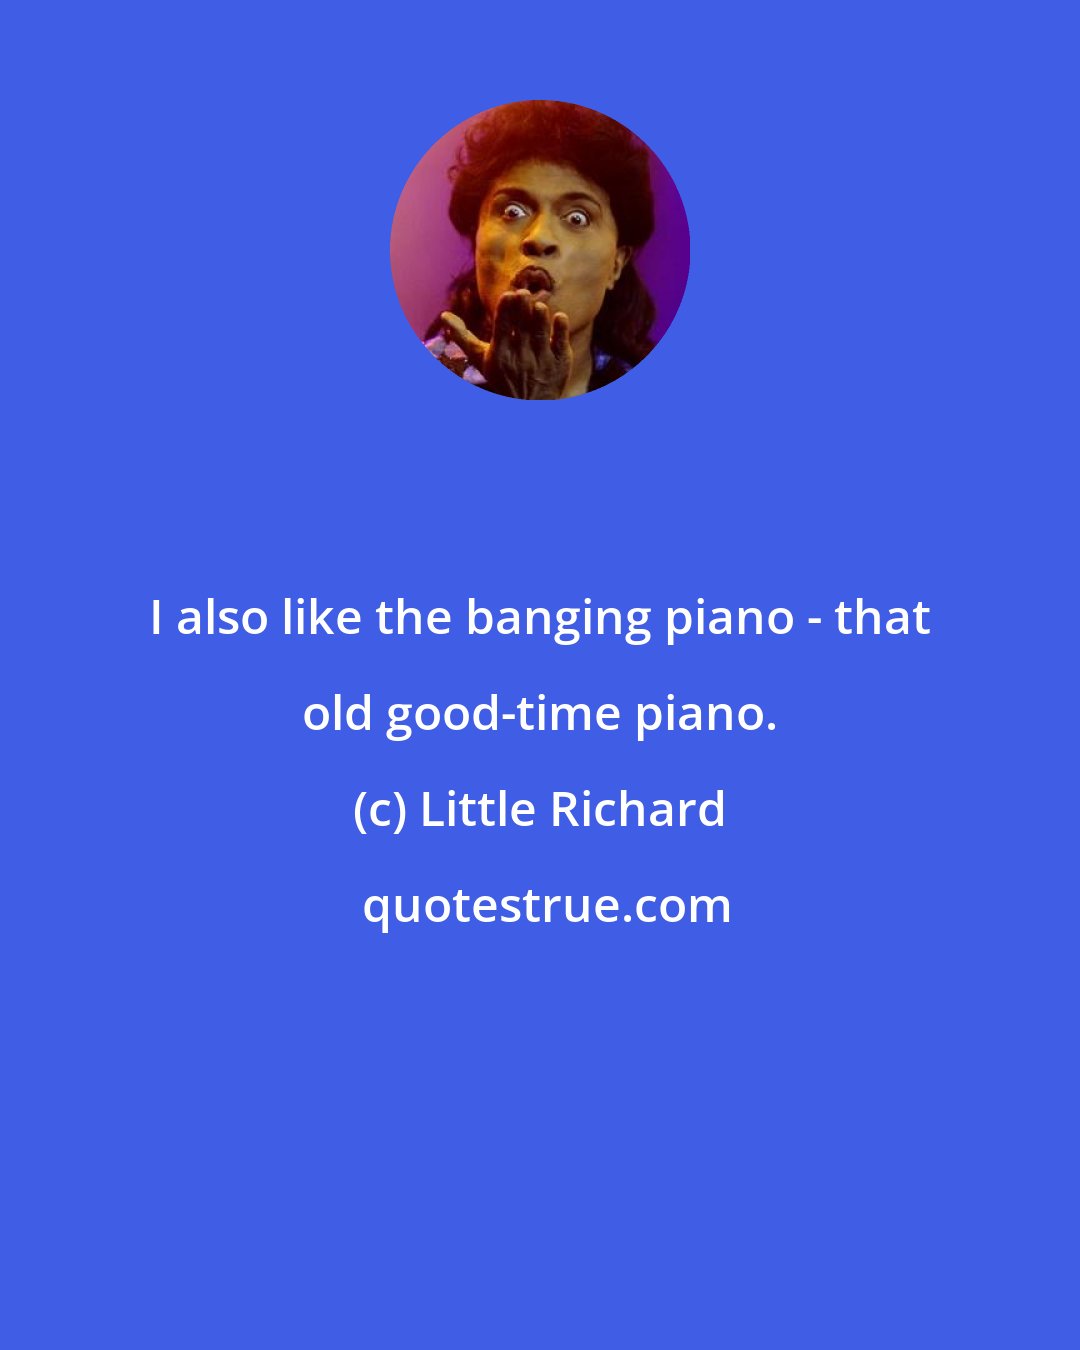 Little Richard: I also like the banging piano - that old good-time piano.